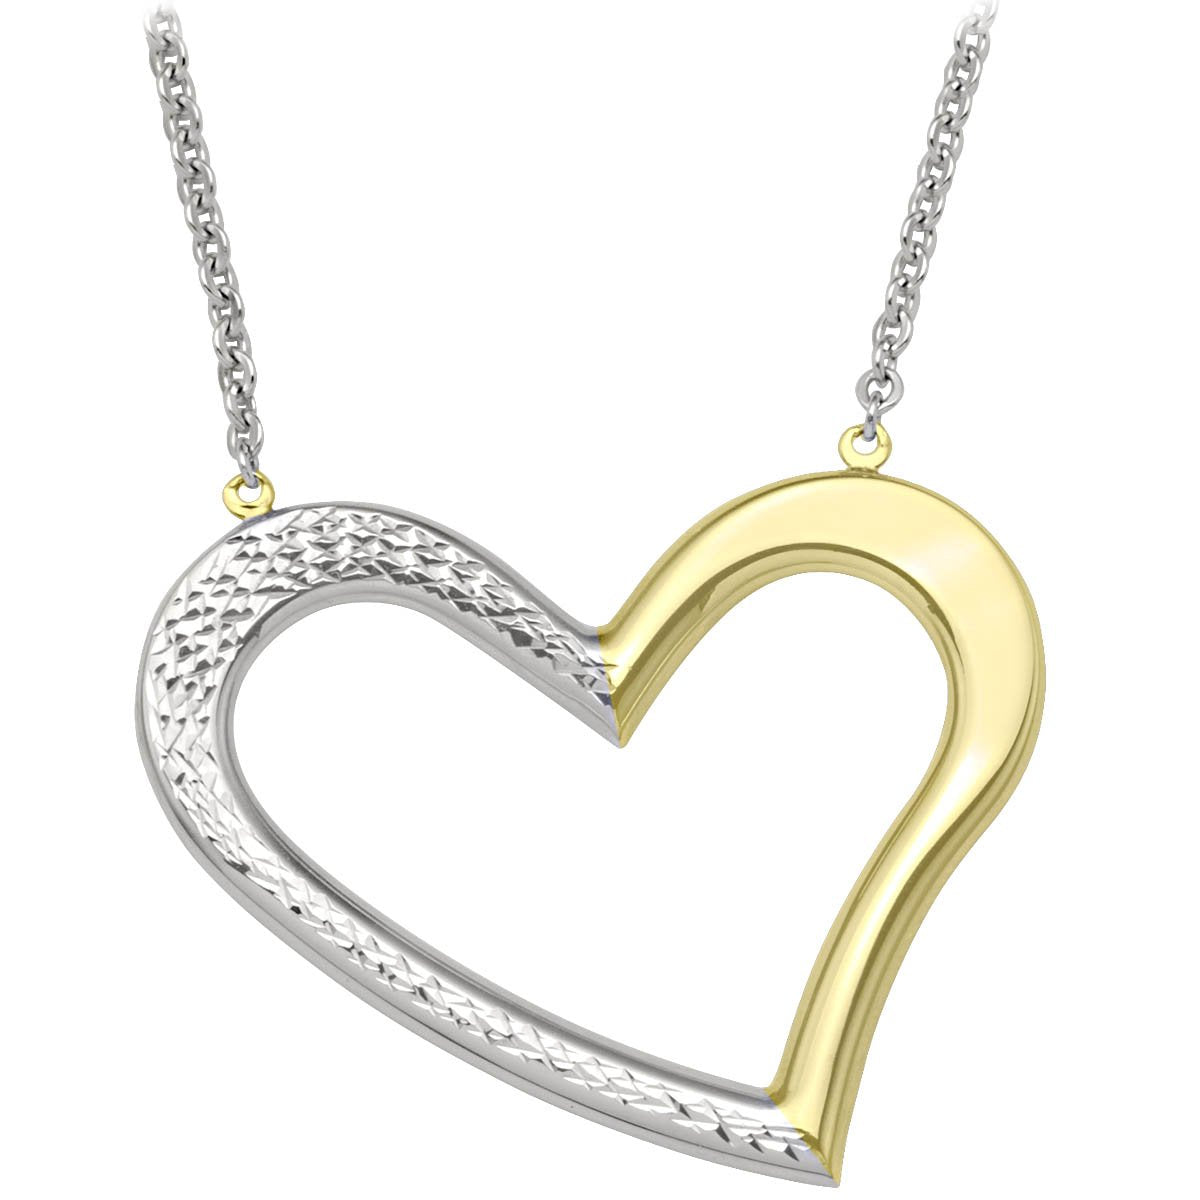 NECKALES TWO TONE GOLD LARGE OPEN HEART 